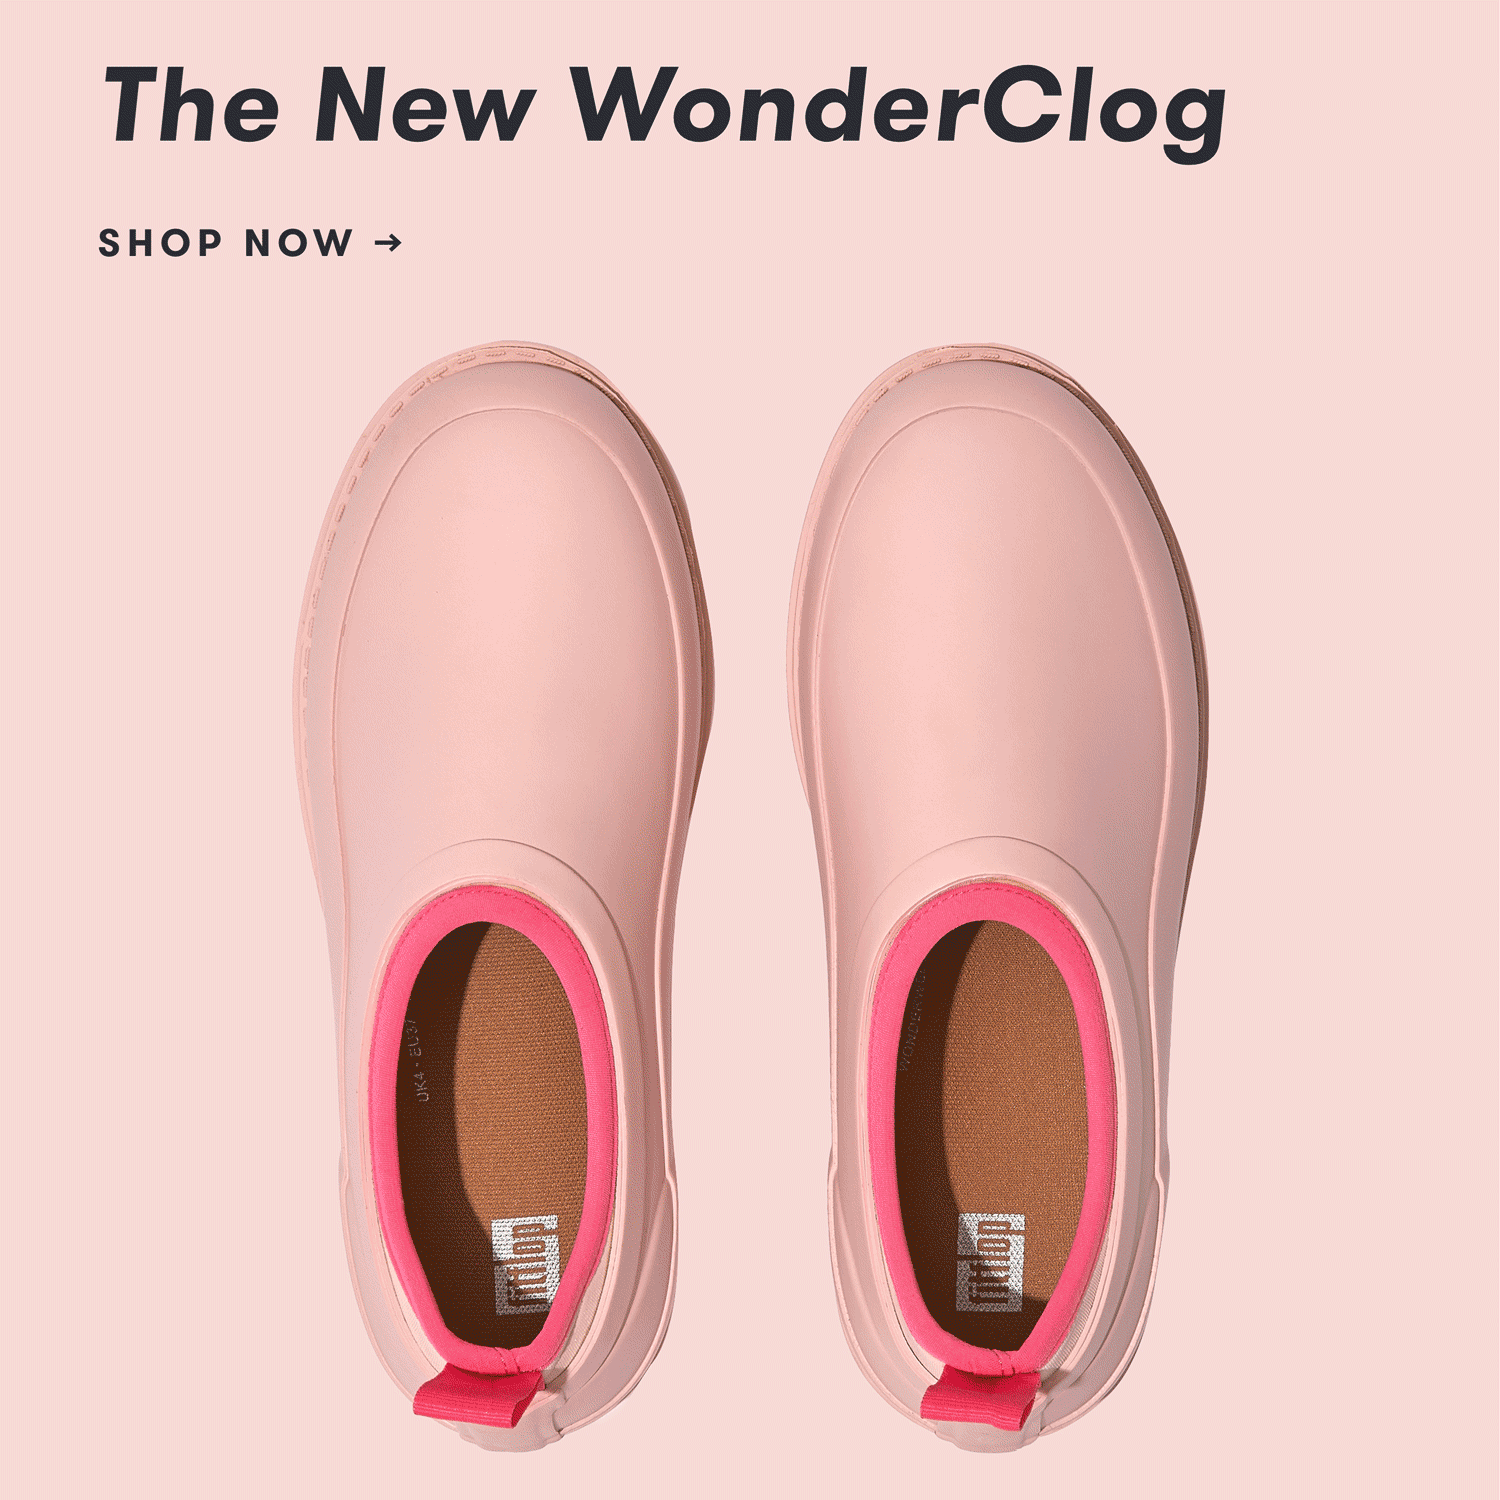 The new Wonderclog. Shop now